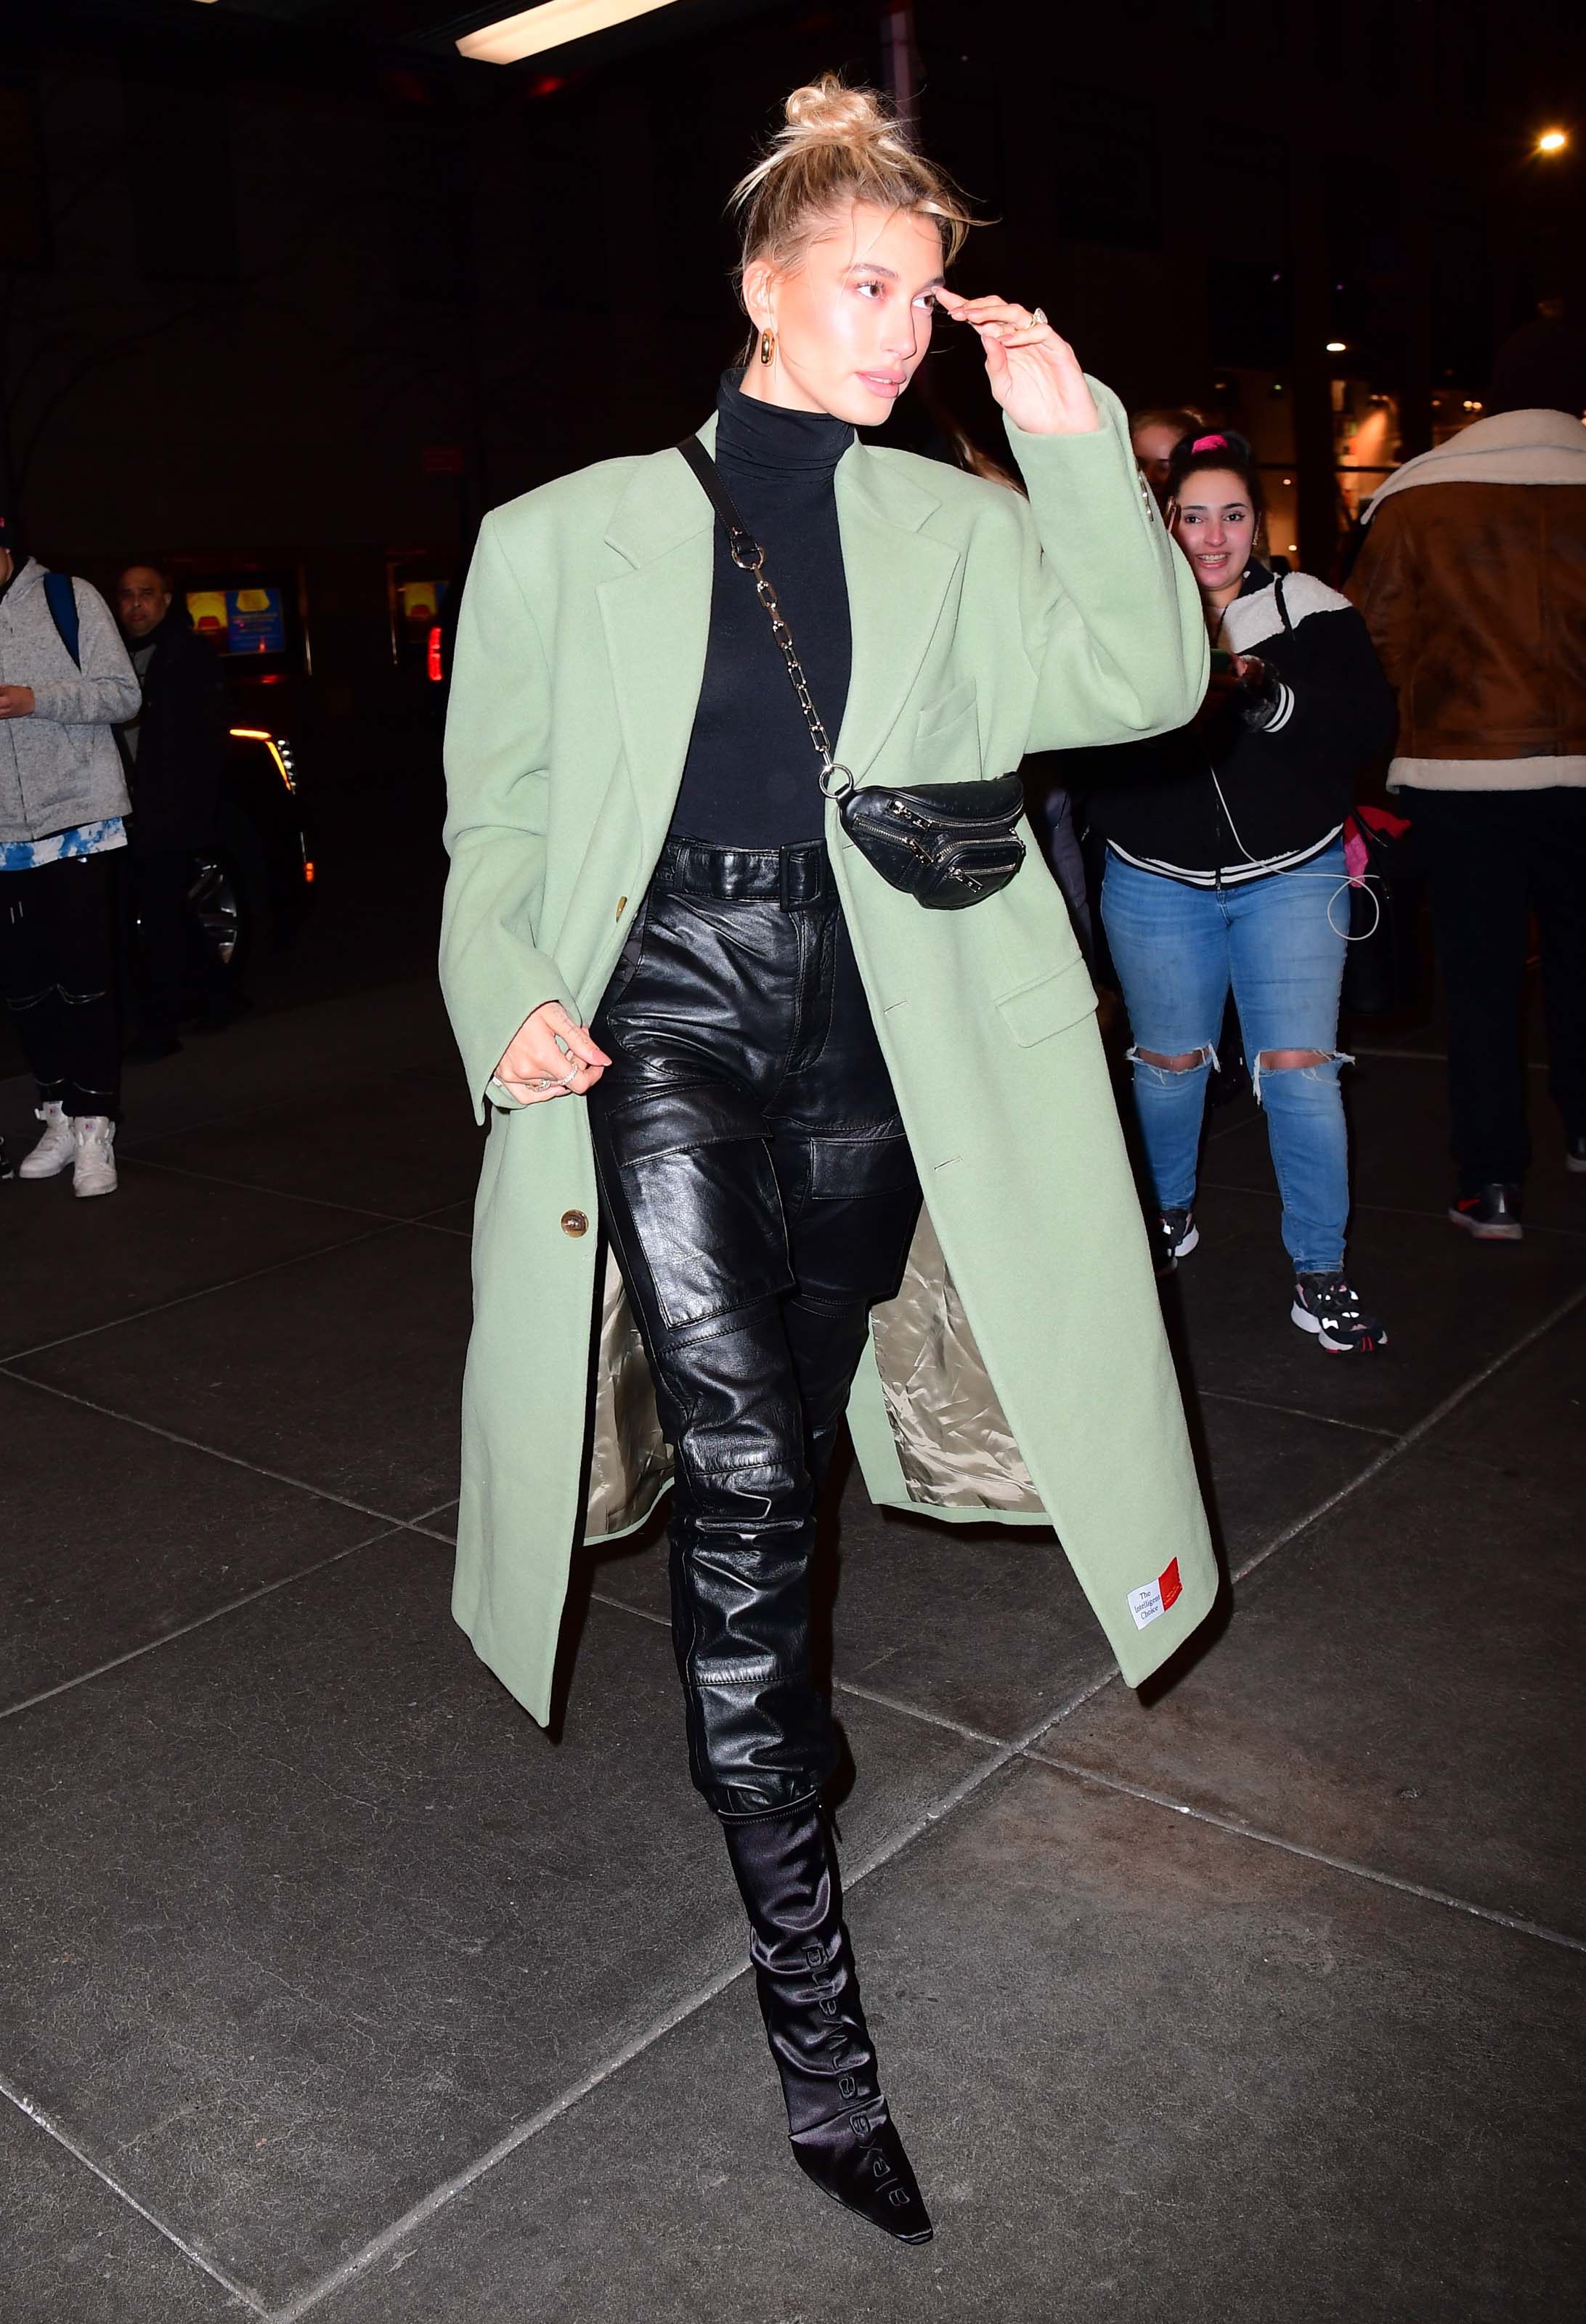 Hailey Bieber arrives at Saturday Night Live